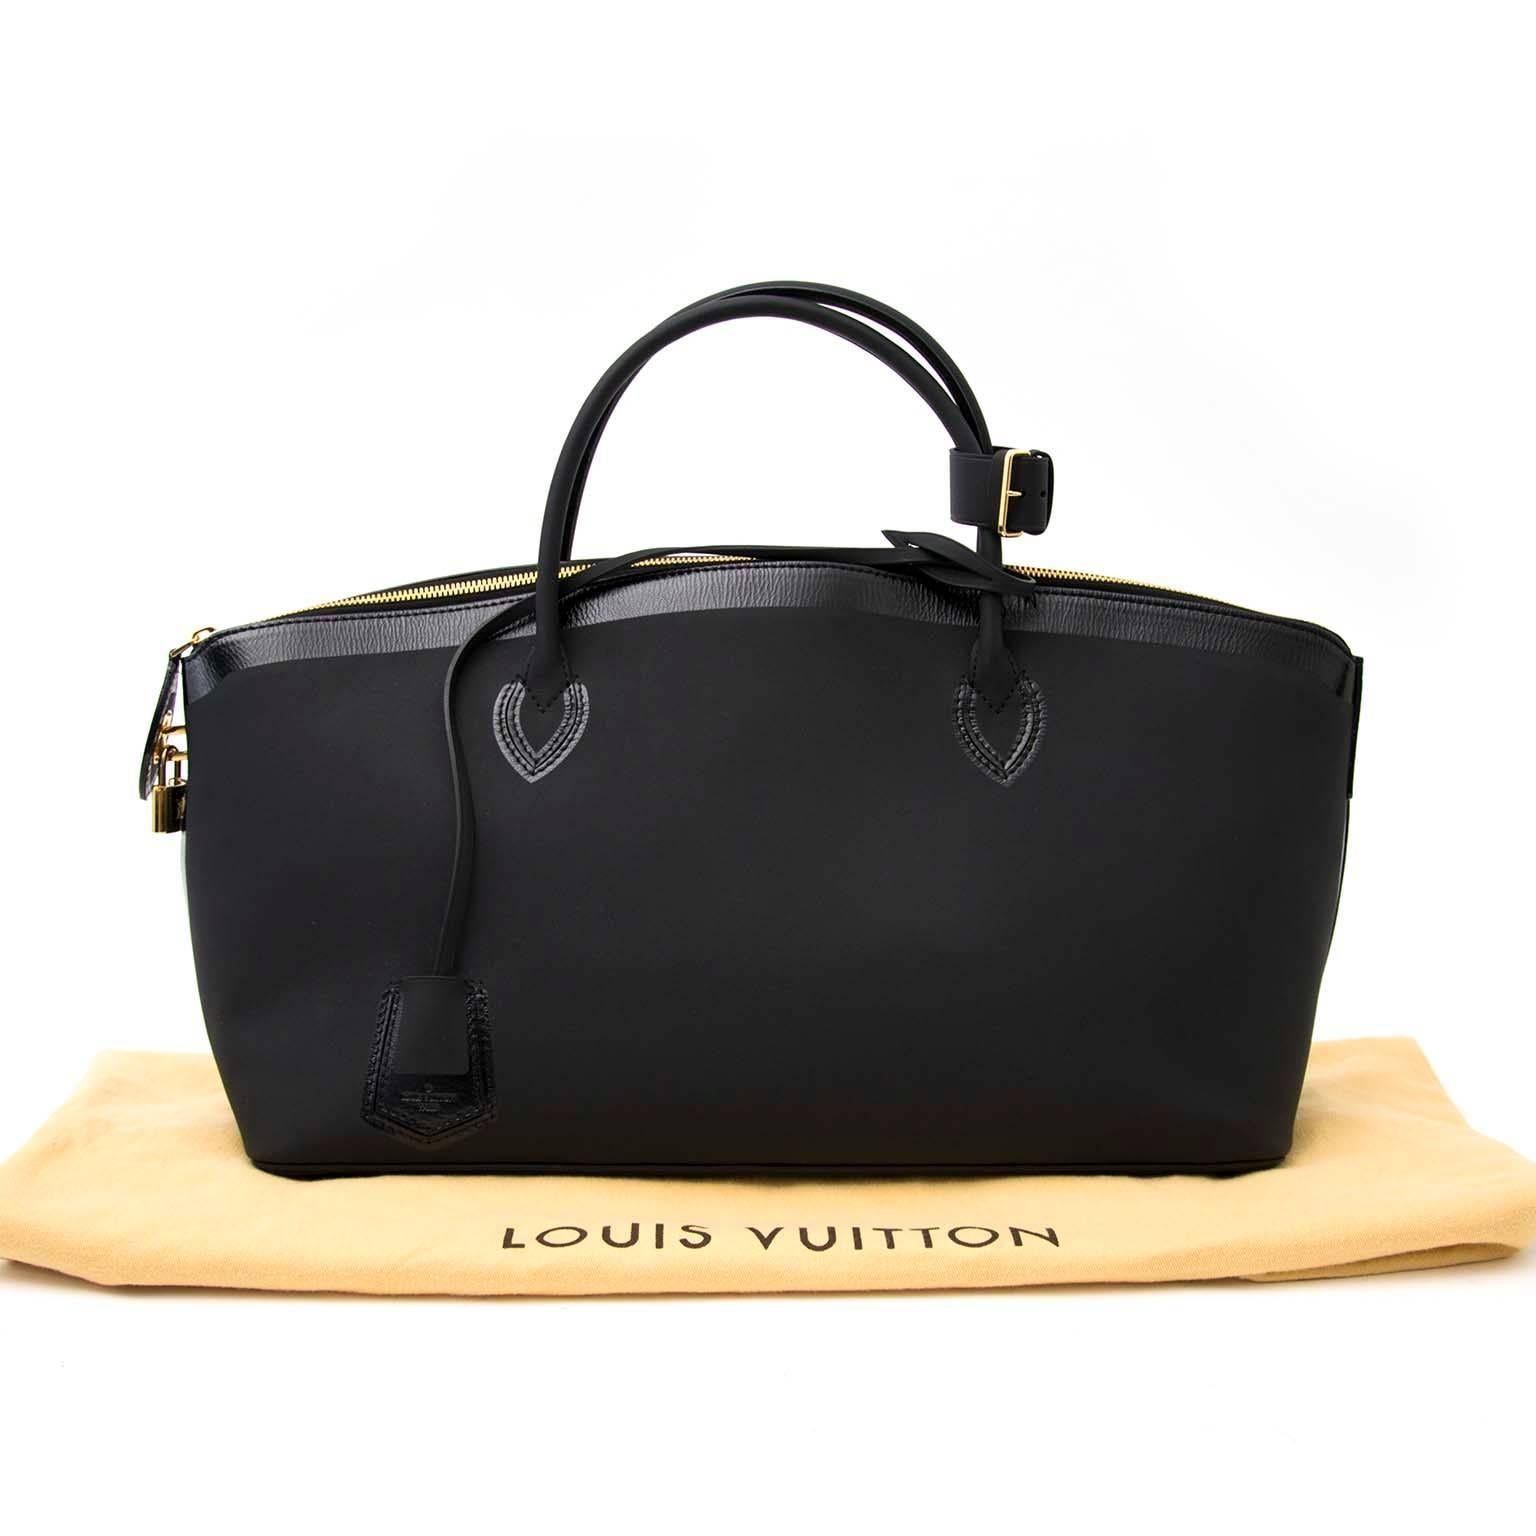 Excellent Preloved Condition

Estimated retail price €4000,-

Louis Vuitton Cuir Obsession Lockit East-West

Louis Vuitton loves playing with texture and proportion. This horizontally stretched Lockit East-West in matte rubberized calfskin is